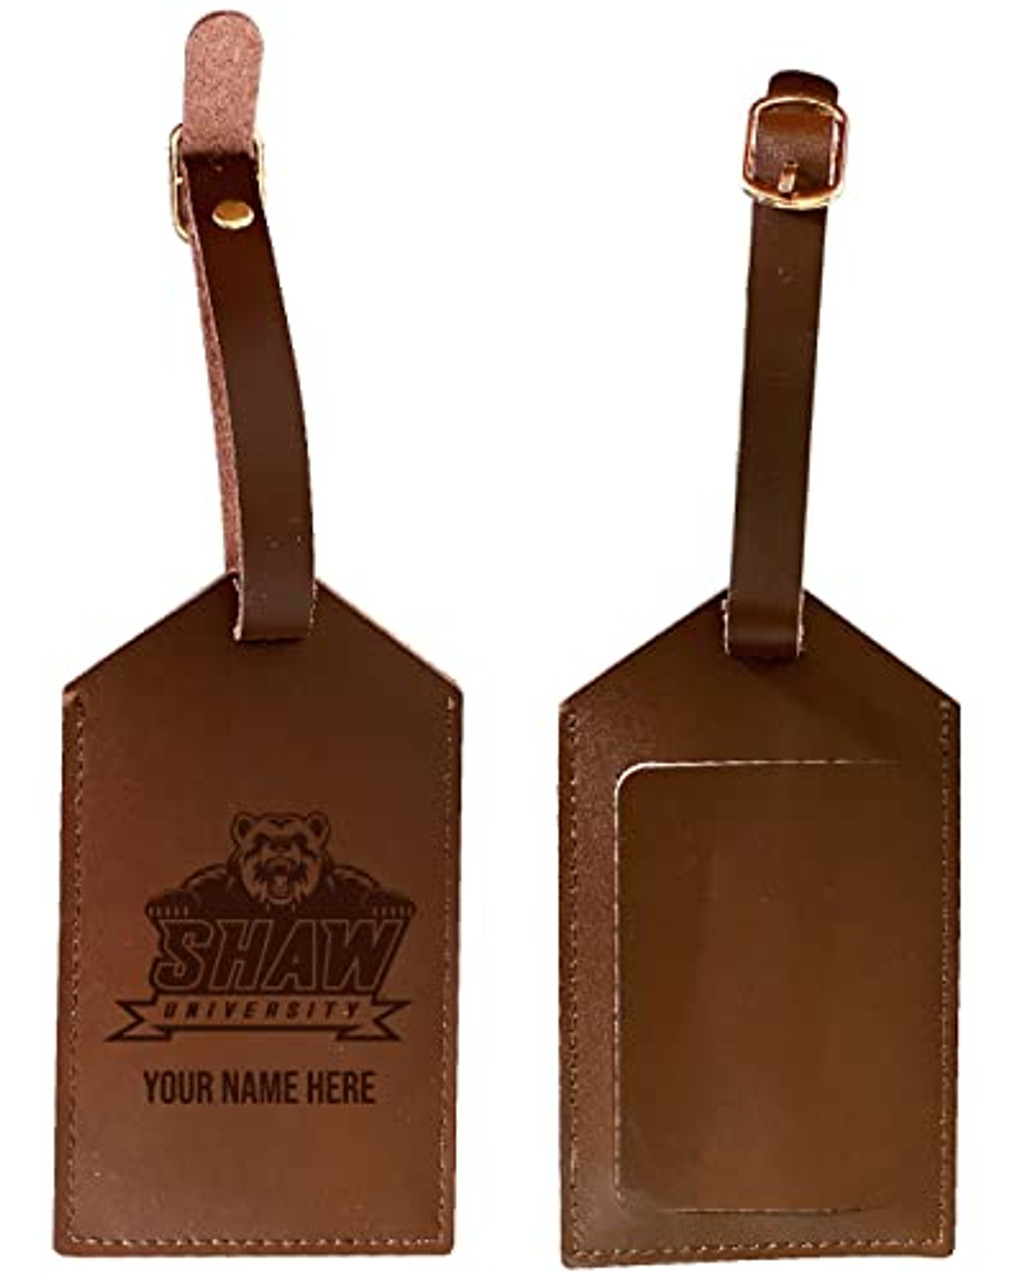 Personalized Customizable Shaw University Bears Engraved Leather Luggage Tag with Custom Name